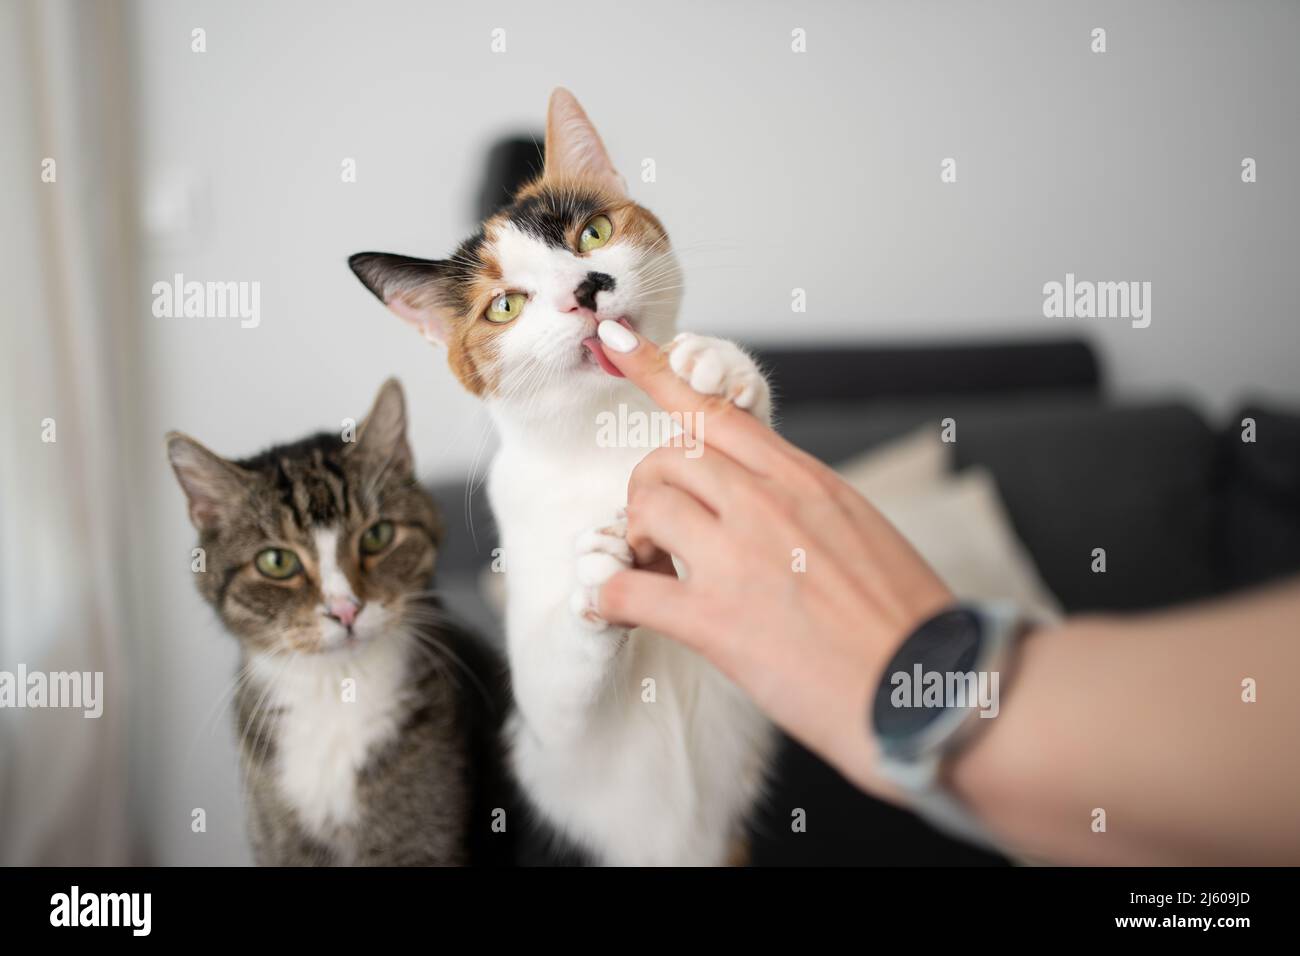 two different looking cats side by side. One cat is licking finger of female pet owner Stock Photo